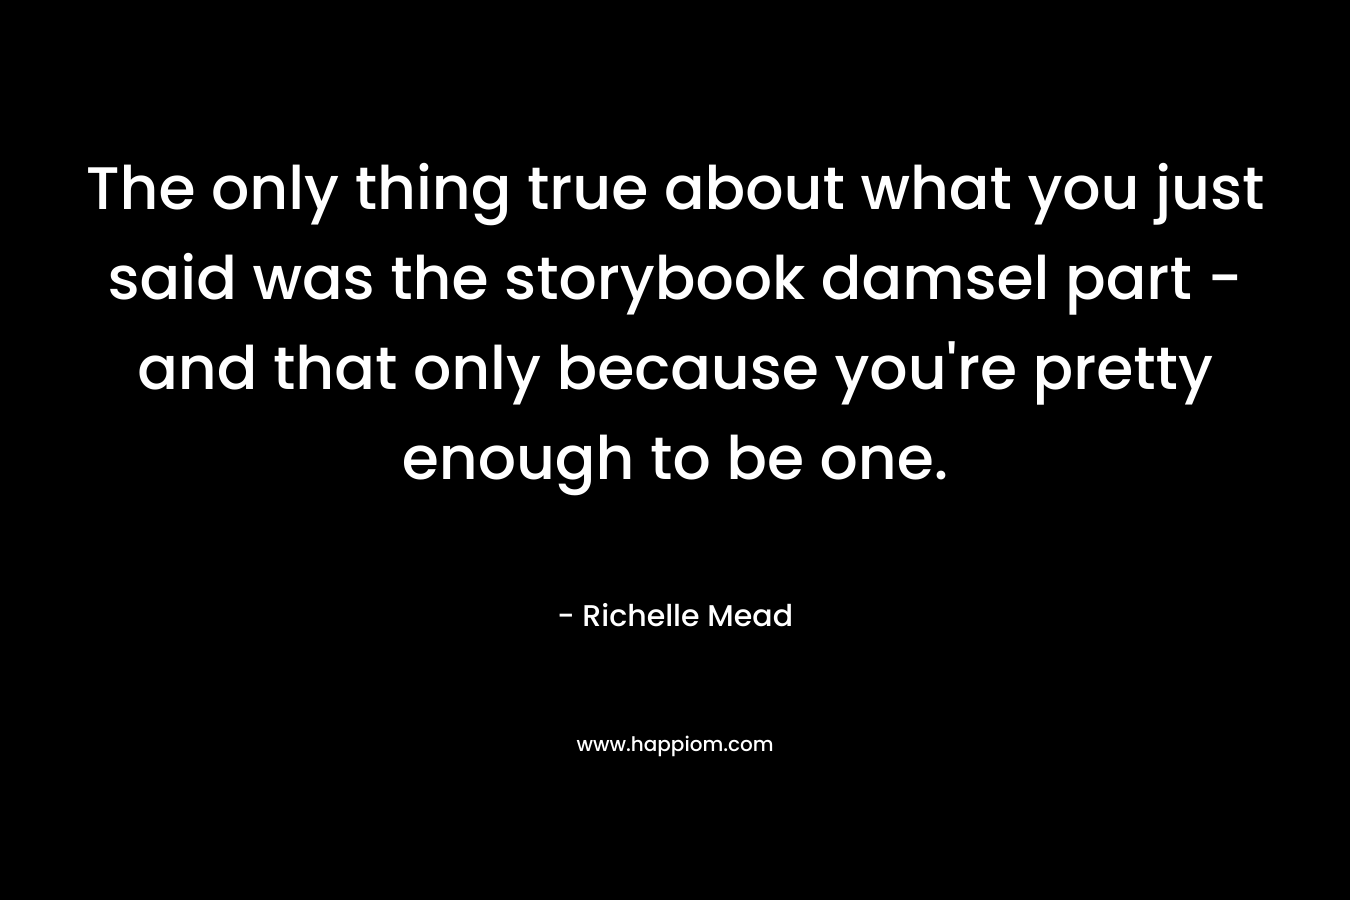 The only thing true about what you just said was the storybook damsel part – and that only because you’re pretty enough to be one. – Richelle Mead